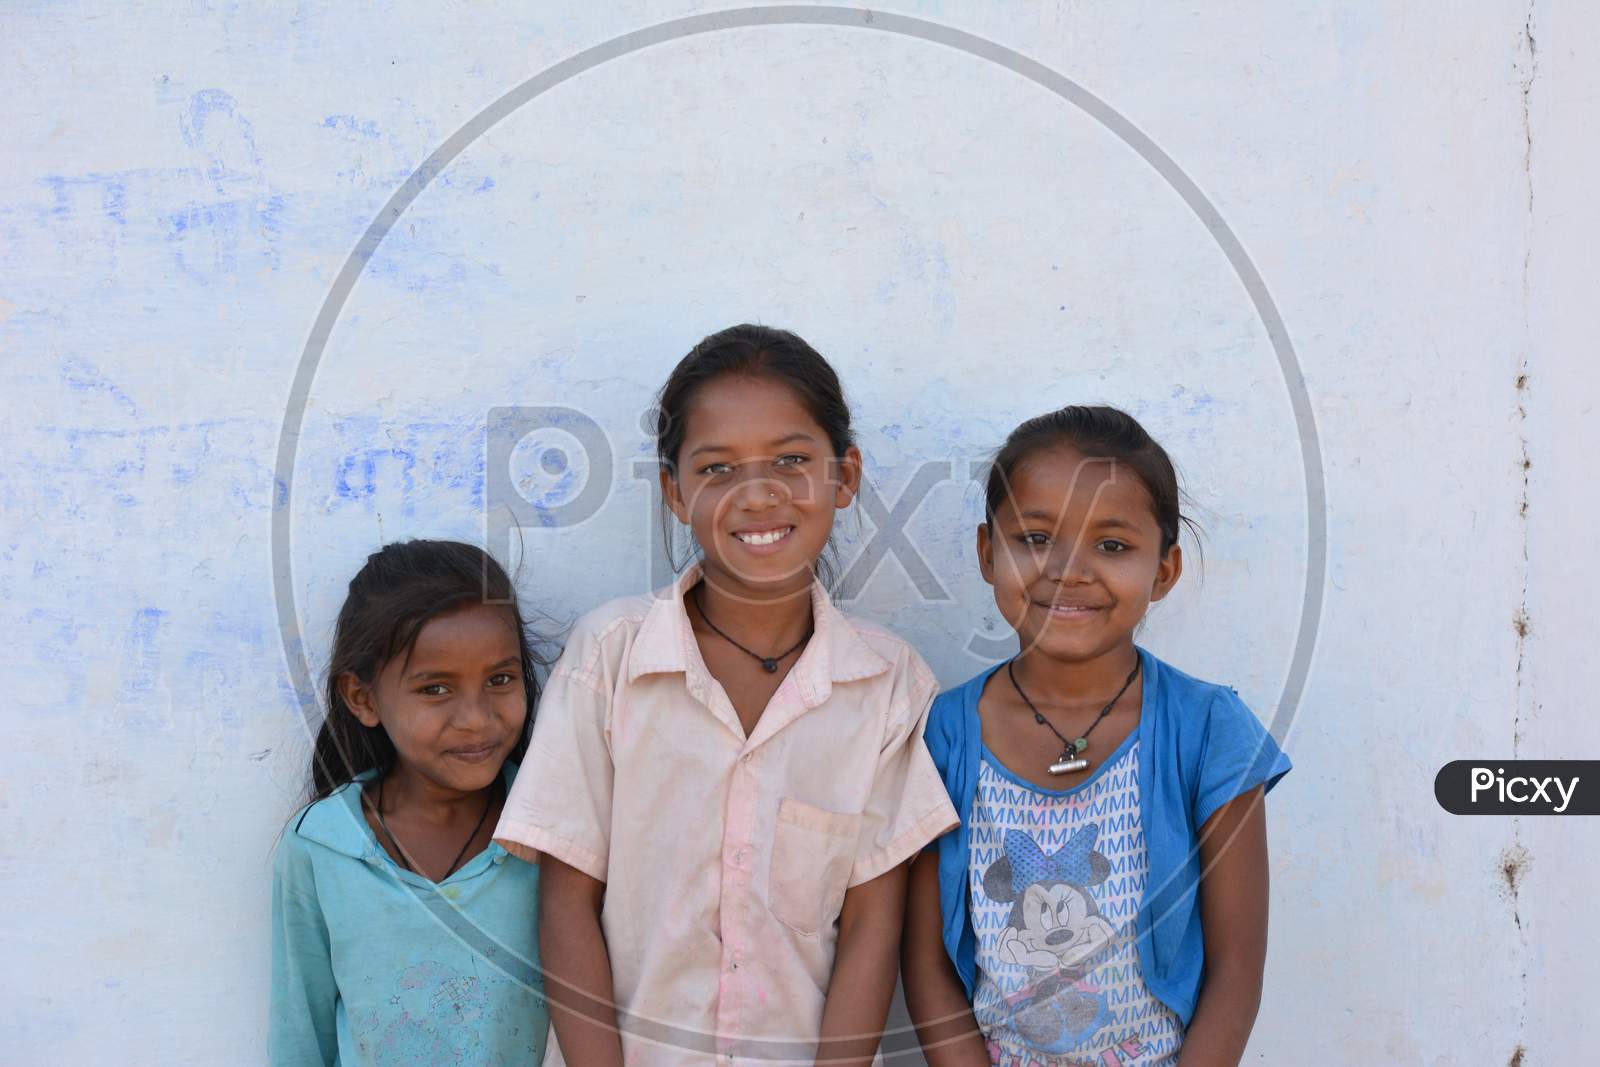 TIKAMGARH, MADHYA PRADESH, INDIA - MARCH 24, 2020: Group of happy Indian little village girls standing in front of their house.